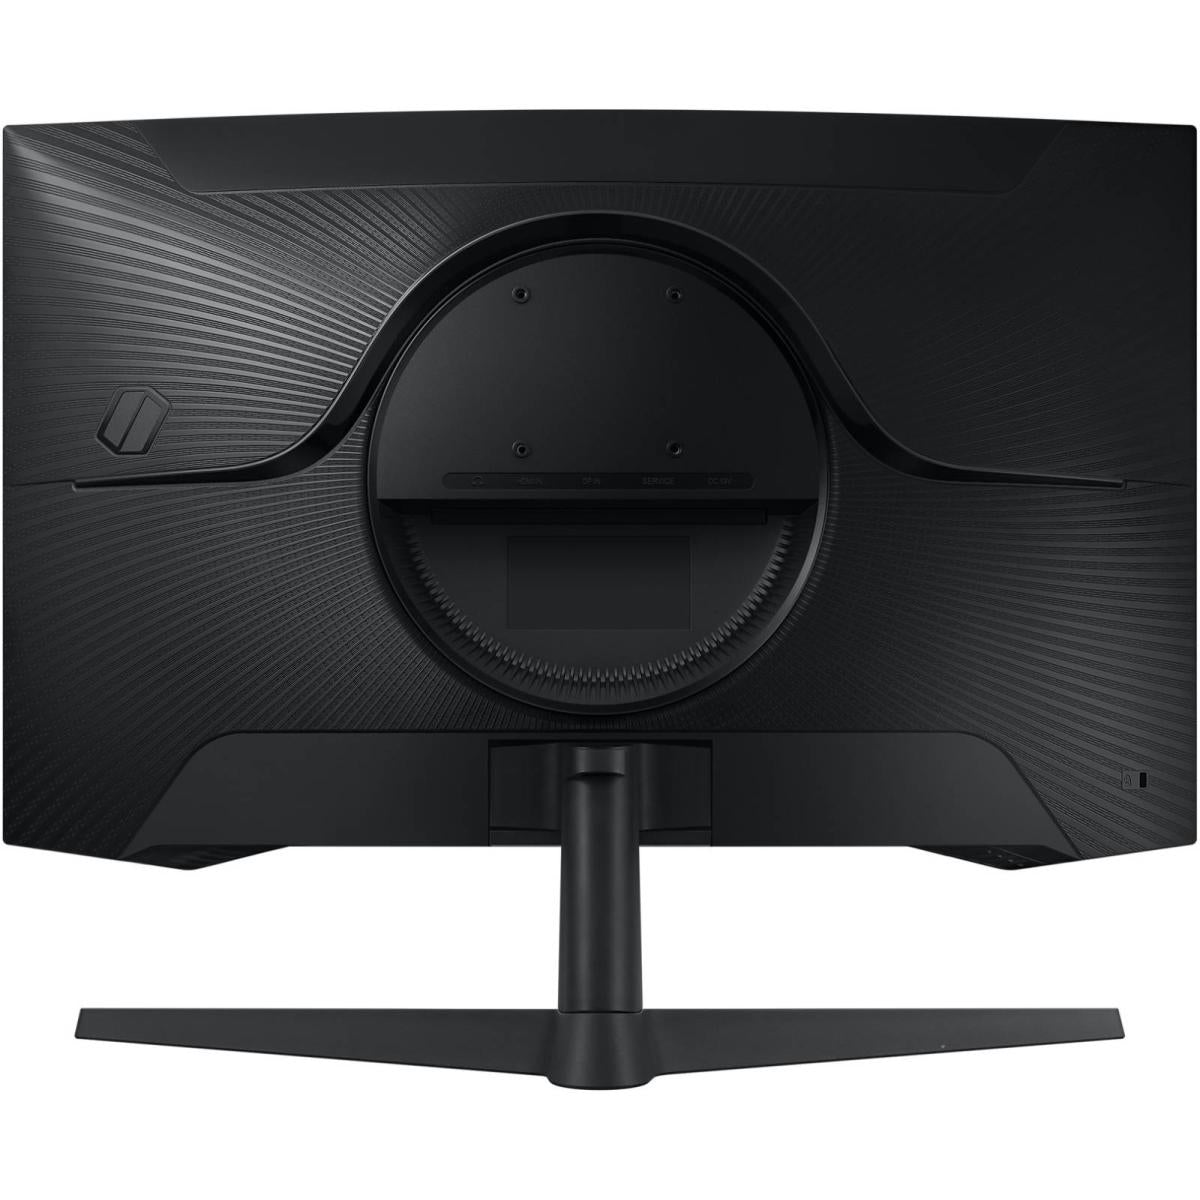 Samsung Odyssey G5 (CG55) 32-Inch Gaming Monitor - VA Panel, 165Hz Refresh Rate, 1ms, HDR10, 1000R Curved Display - FreeSync Support  2K QHD (2560 x 1440)